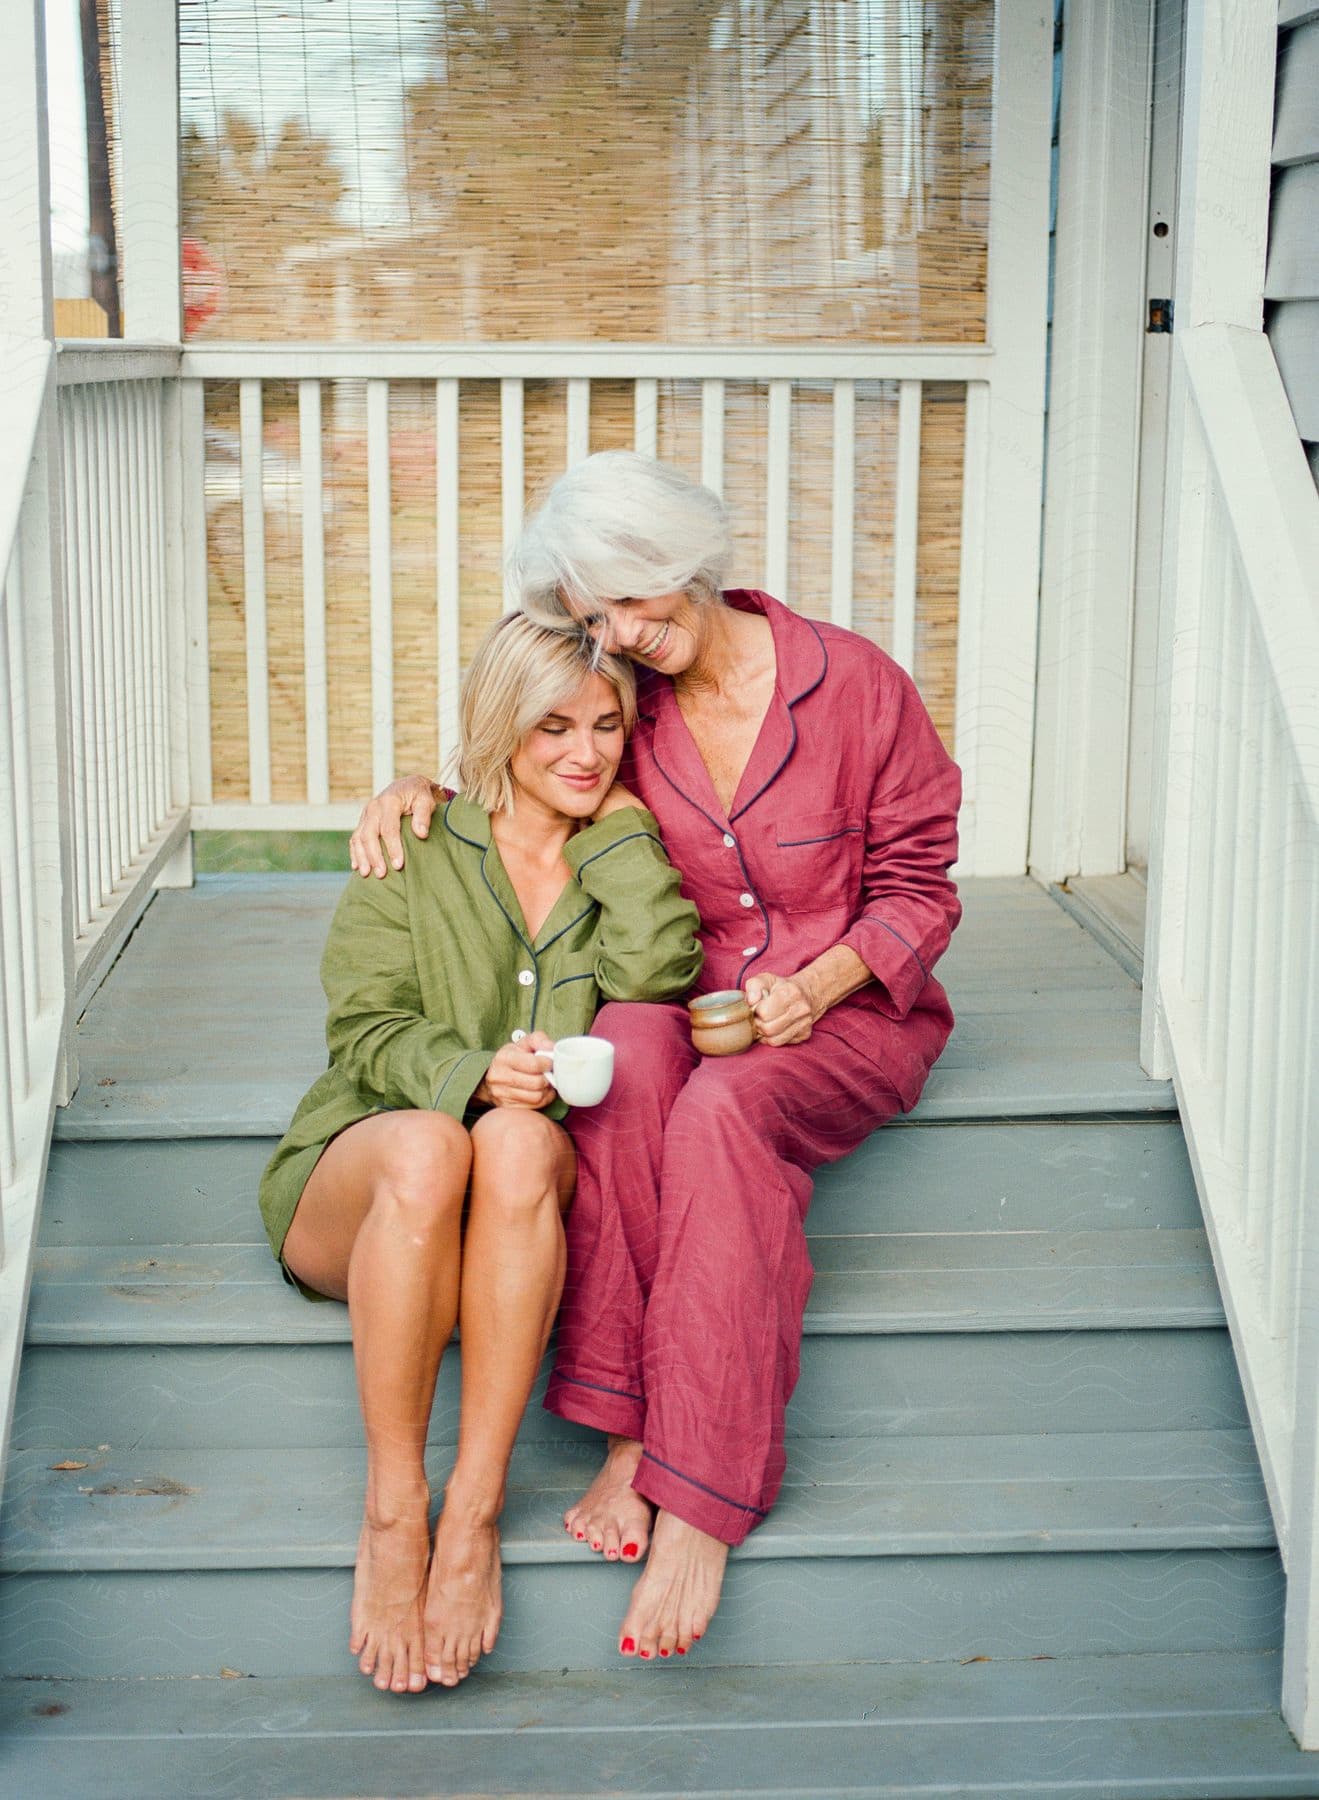 Mother and daughter in pajamas sitting together on a porch step while hugging each other affectionately and holding cups.